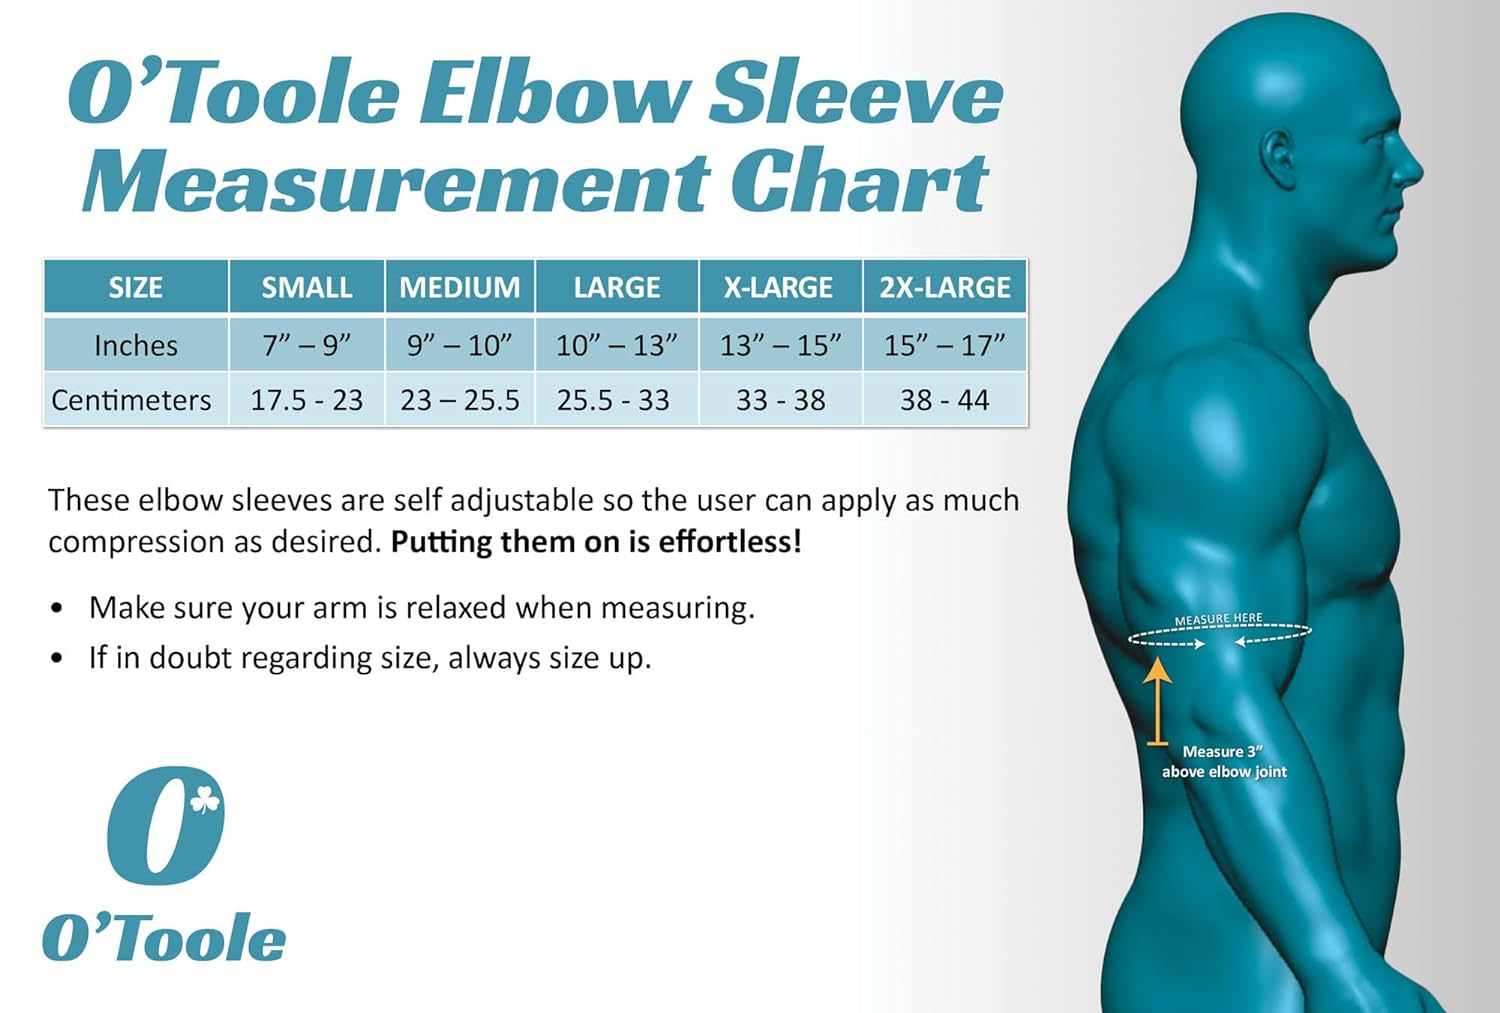 O’Toole Elbow Sleeve Review